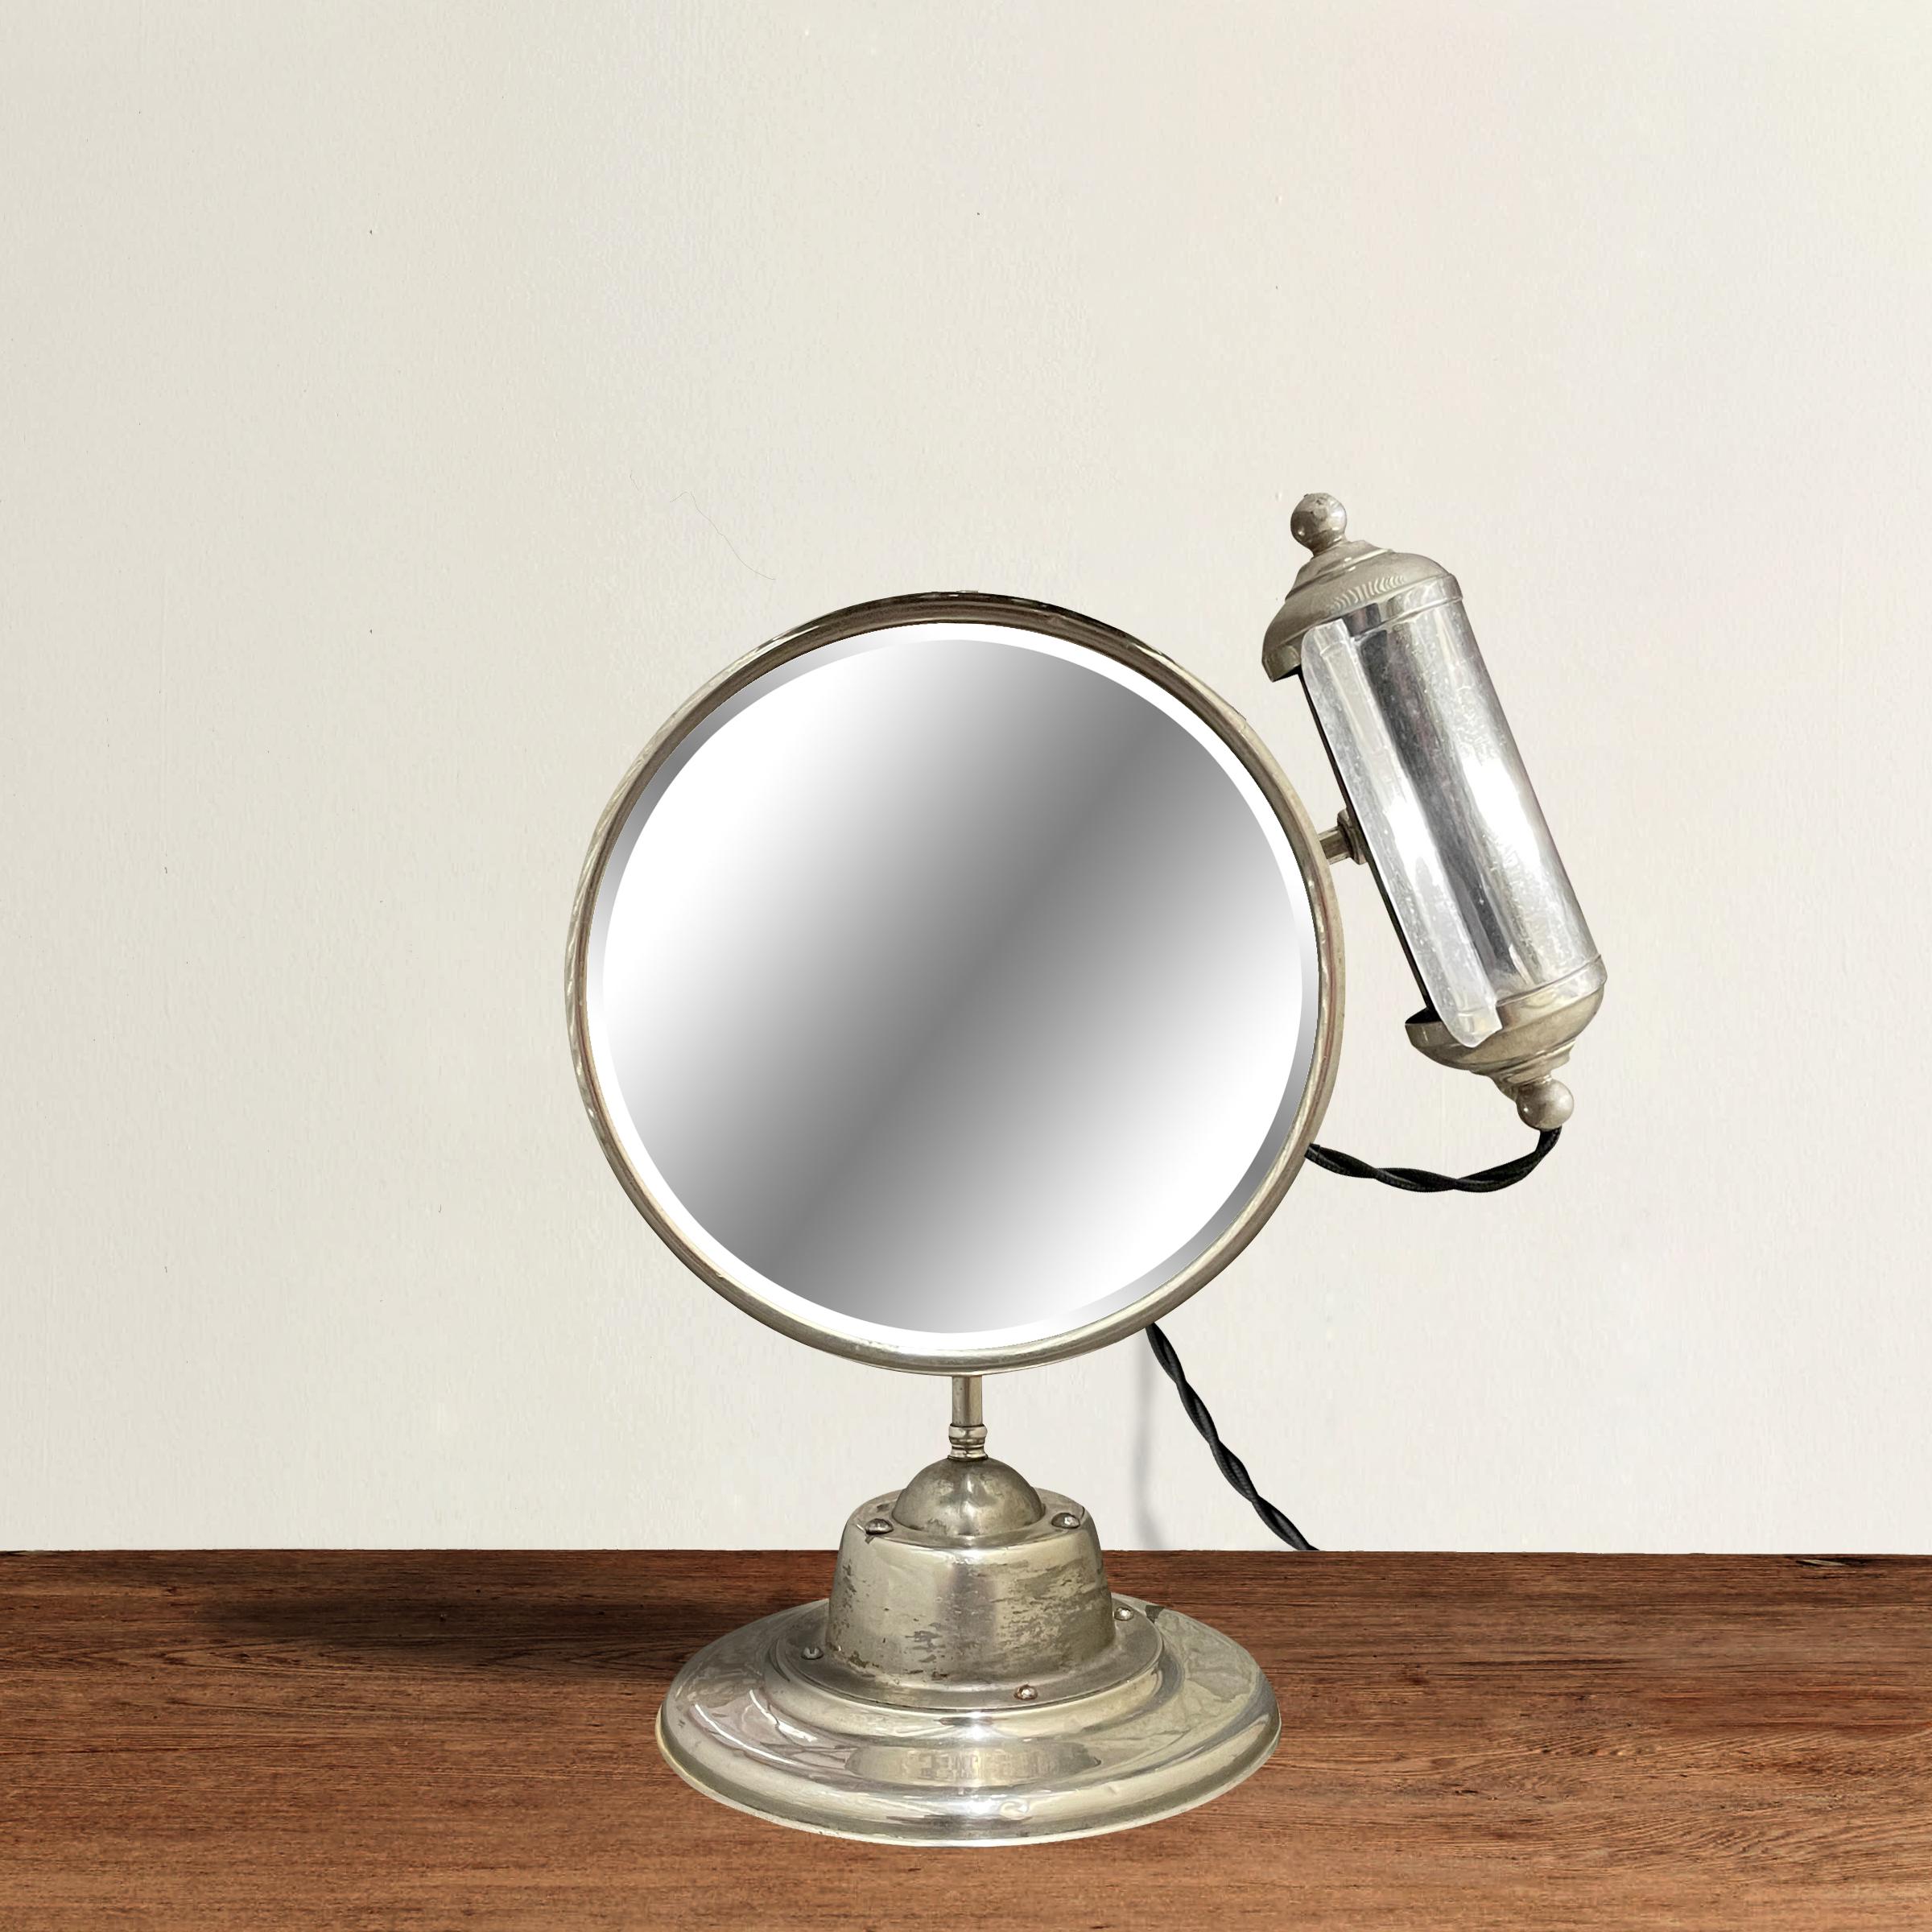 Plated Early 20th Century American Lighted Shaving Mirror